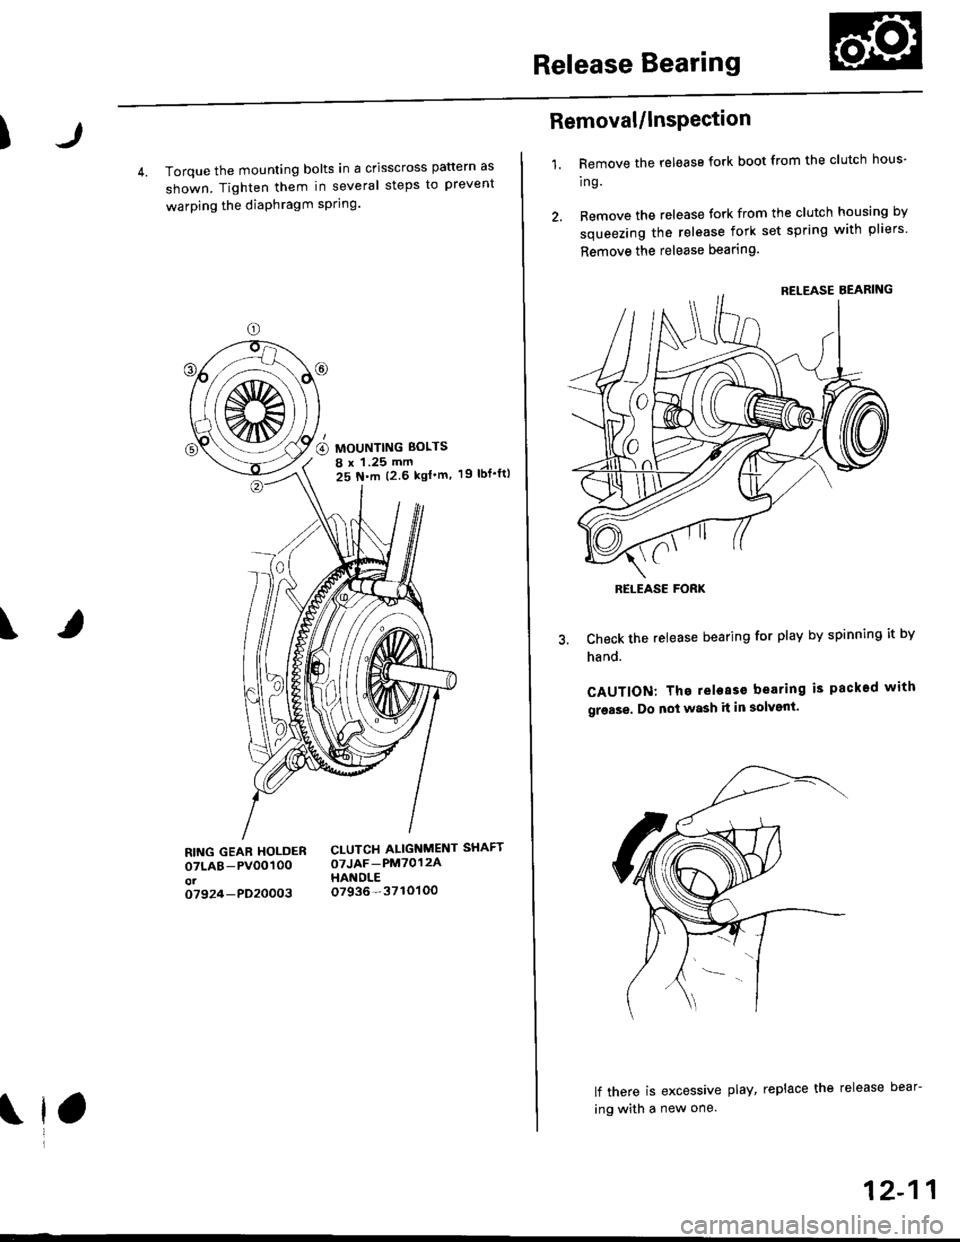 HONDA CIVIC 1998 6.G Workshop Manual Release Bearing
)
4. Torque the mounting bolts in a crisscross pattern as
shown. Tighten them in several steps to prevent
warping the diaPhragm sPring.
19 rbf.ft)
\
RING GEAR HOLDERoTLAB-PV00100ot0792